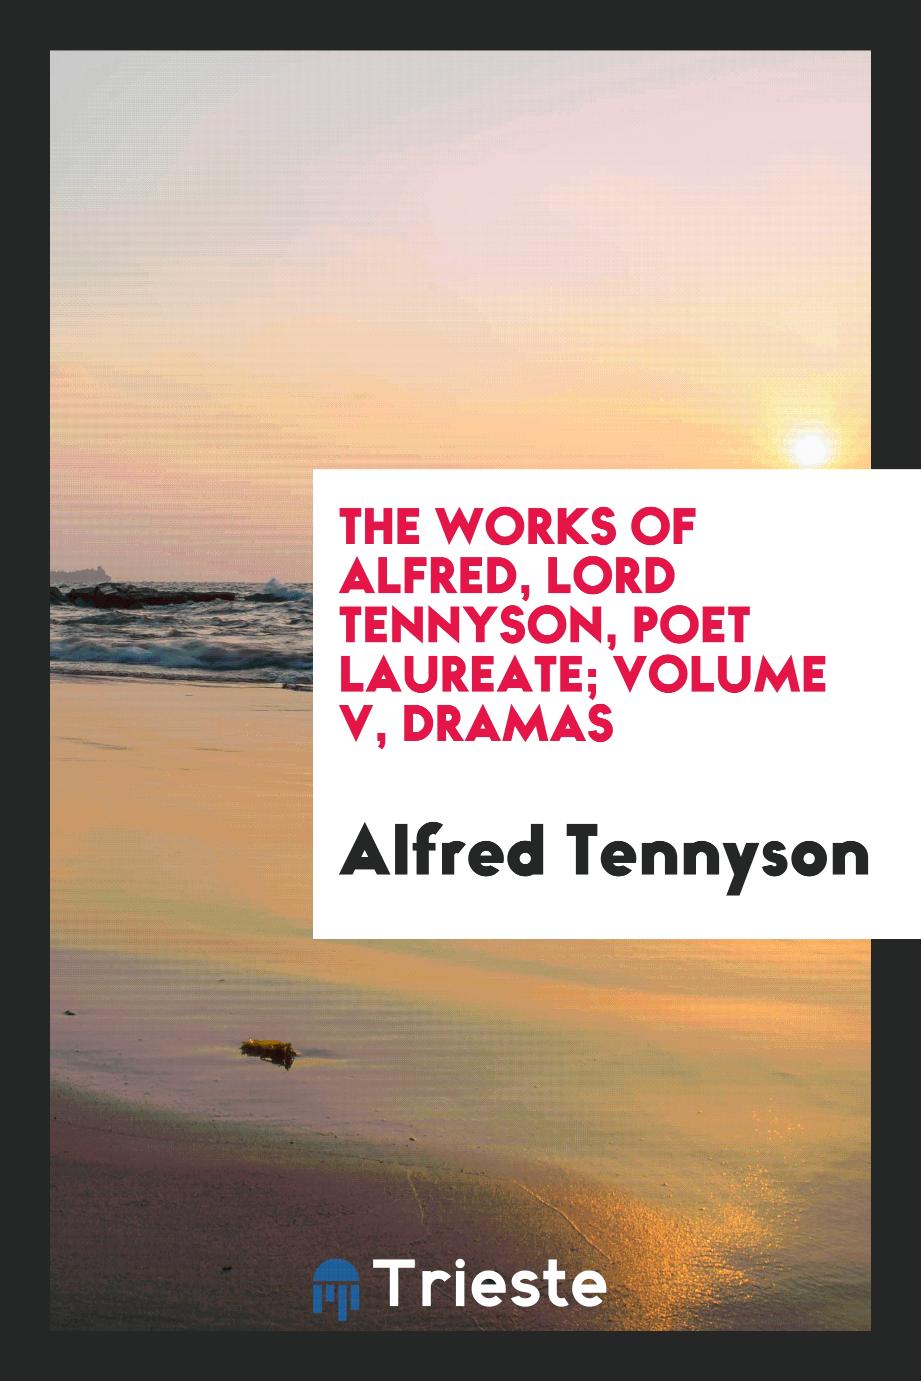 The Works of Alfred, Lord Tennyson, Poet Laureate; Volume V, Dramas